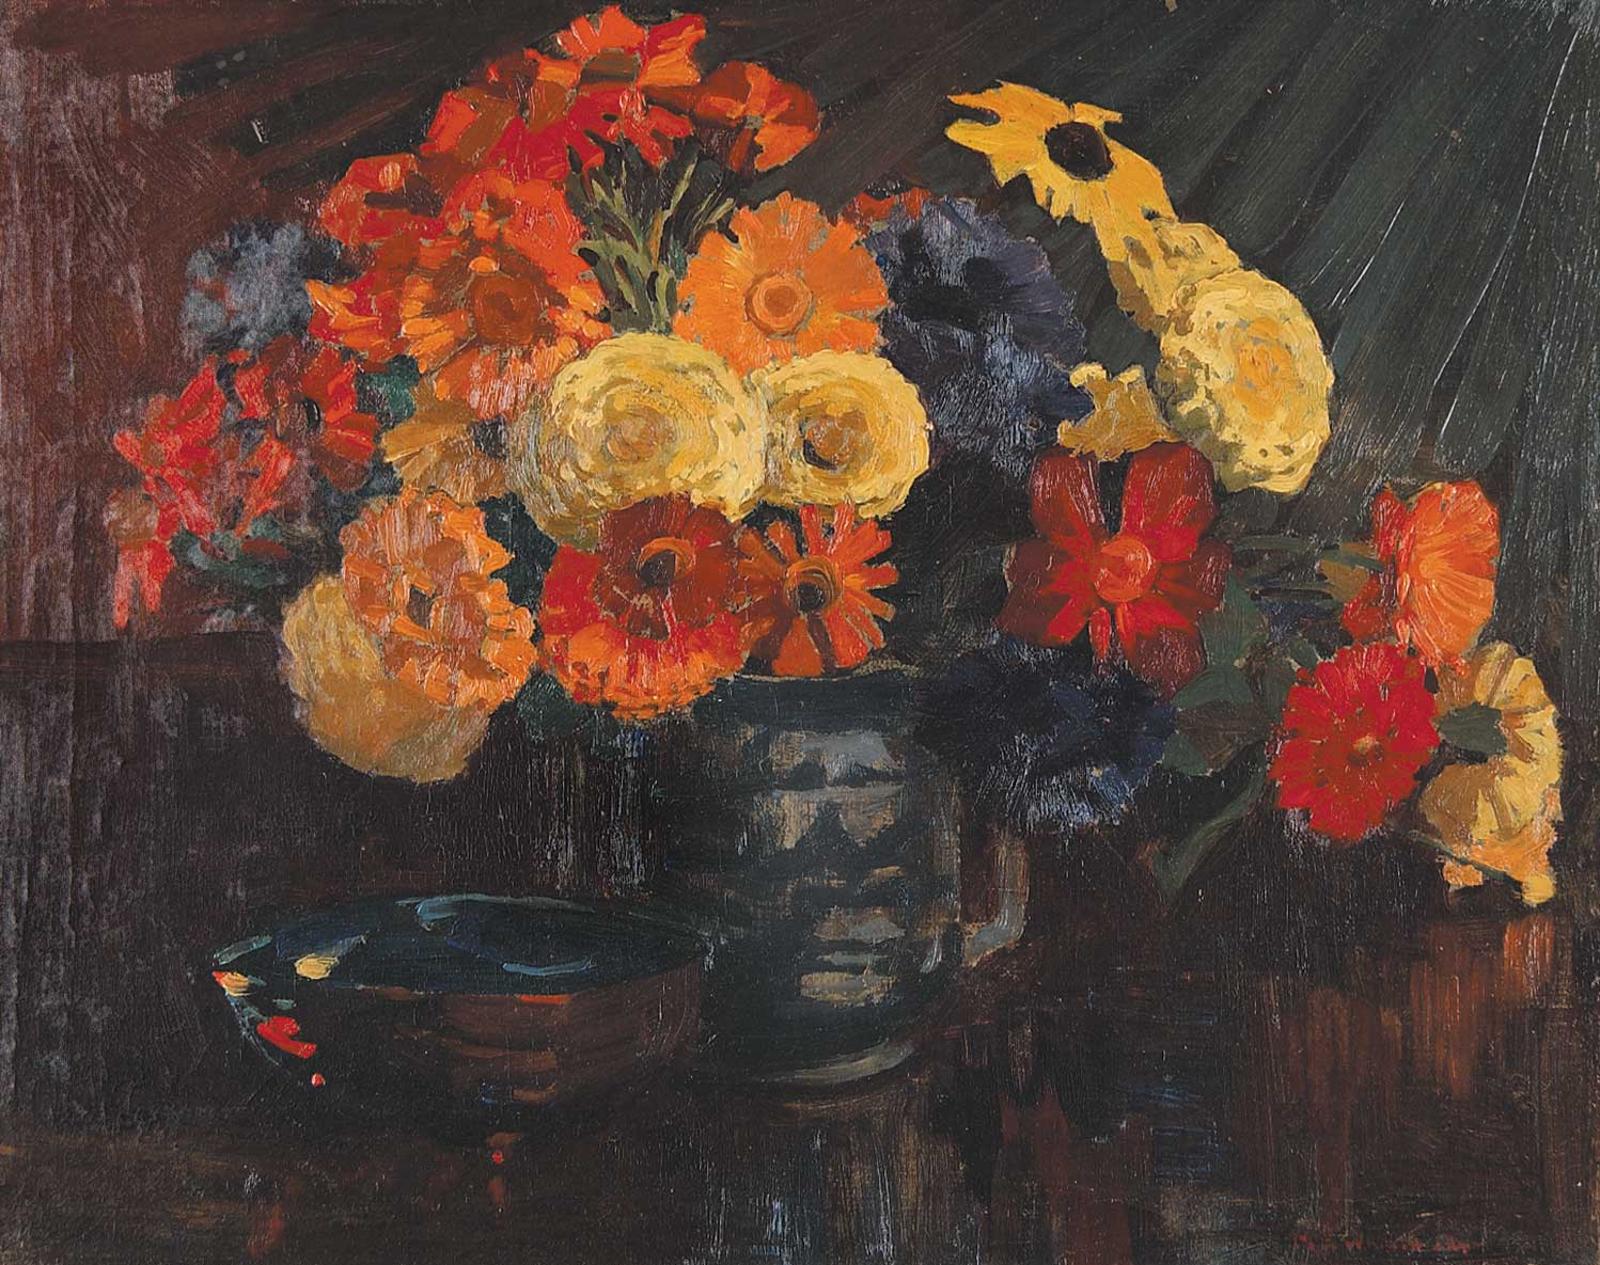 Mary Evelyn Wrinch (1877-1969) - Untitled - Floral Bouquet